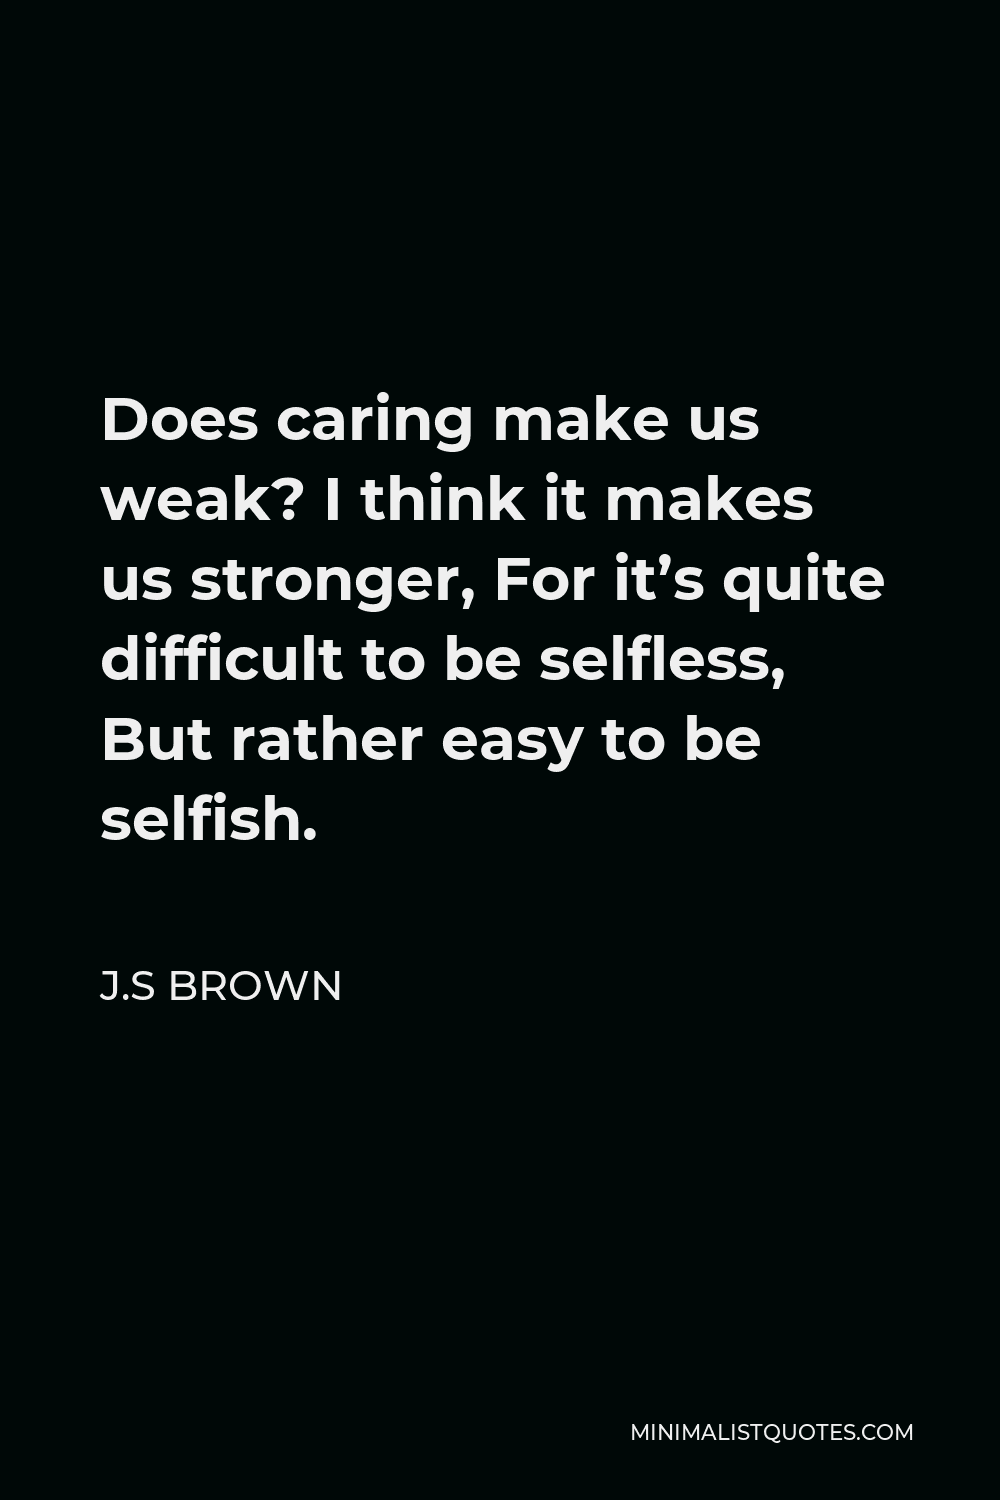 J.S Brown Quote - Does caring make us weak? I think it makes us stronger, For it’s quite difficult to be selfless, But rather easy to be selfish.